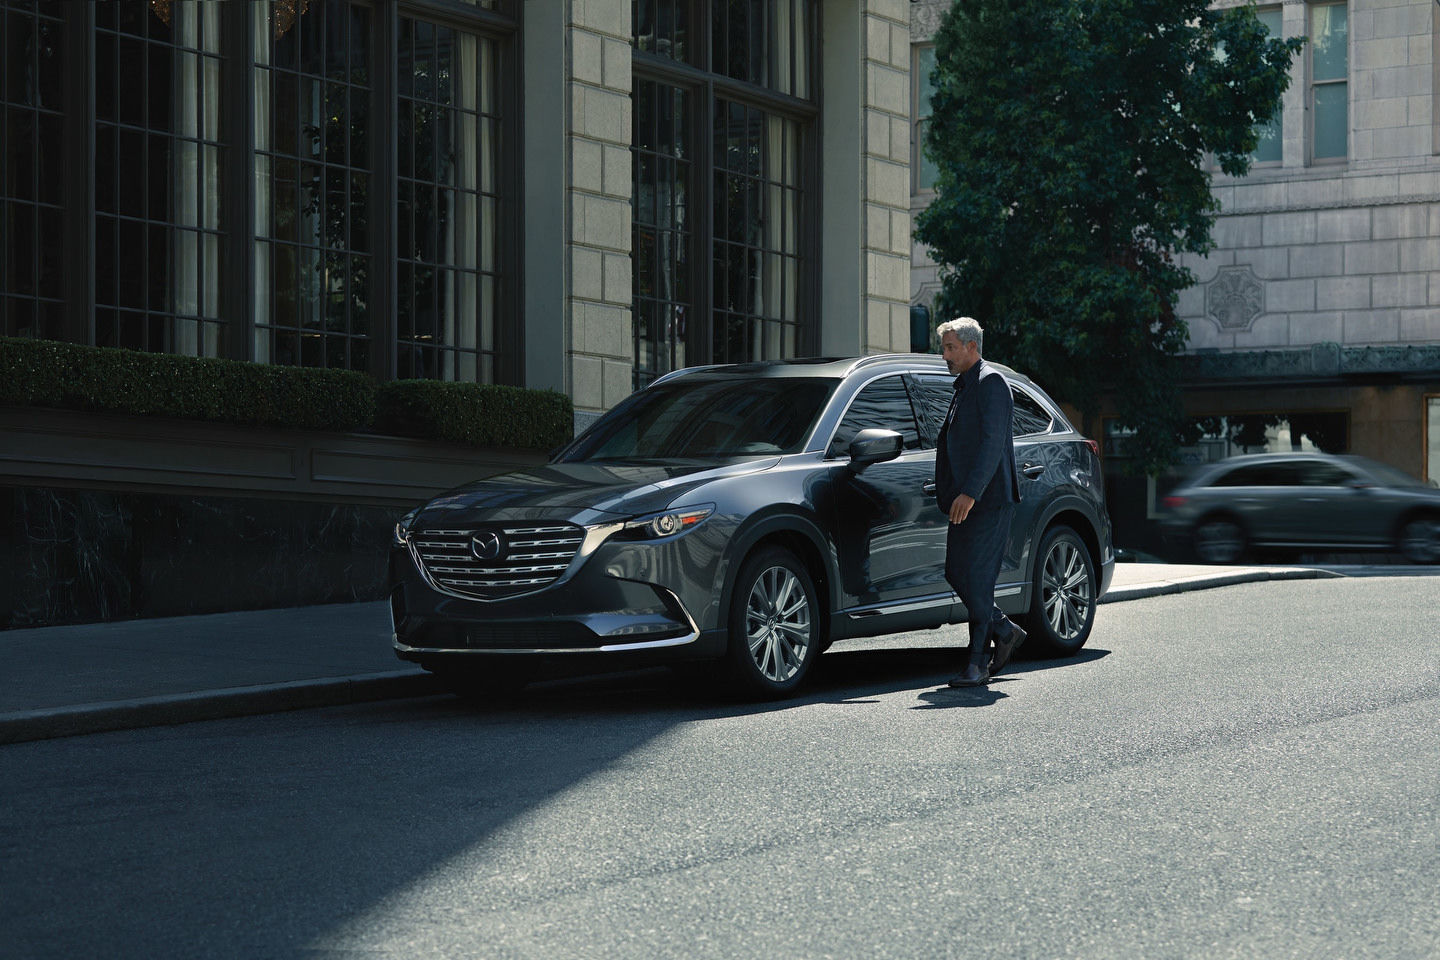 The 2022 Mazda CX-9 gives its owners more performance